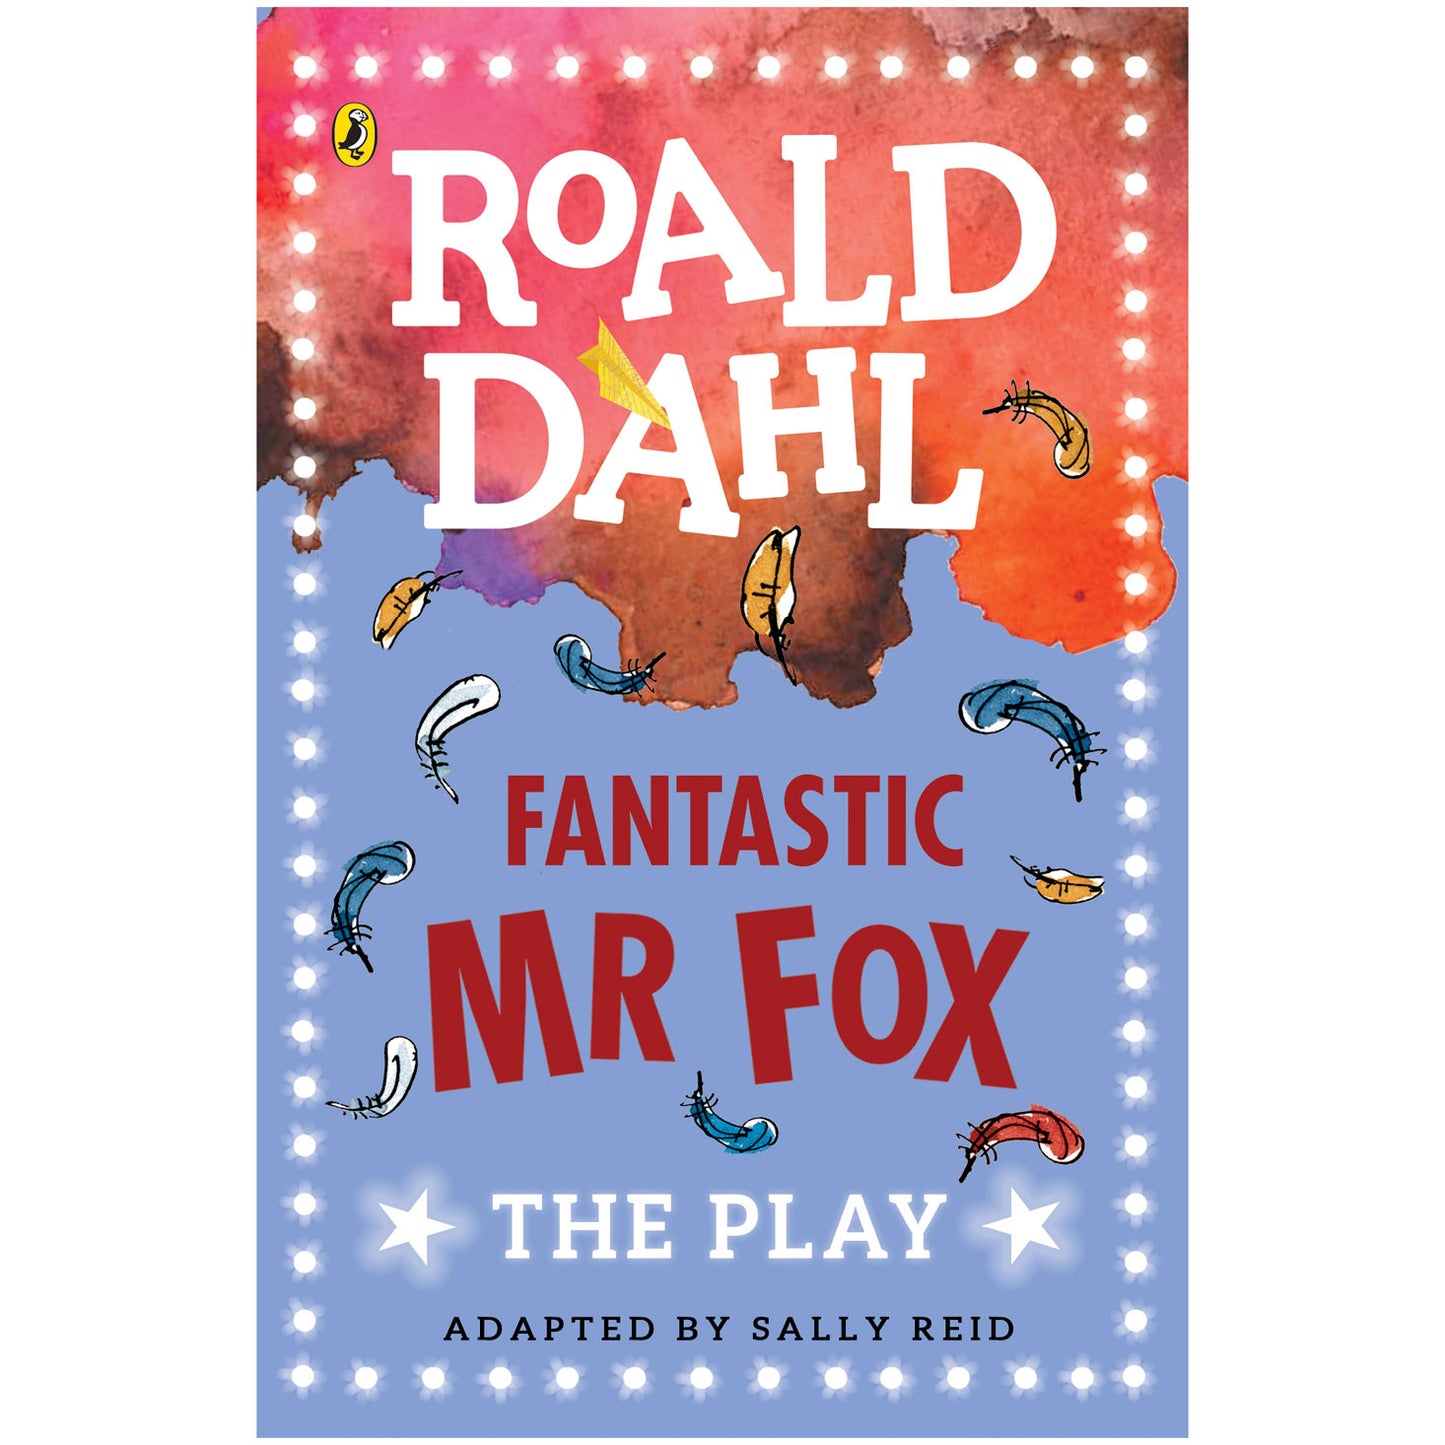 Plays based on Fantastic Mr Fox by Roald Dahl with illustrations by Quentin Blake